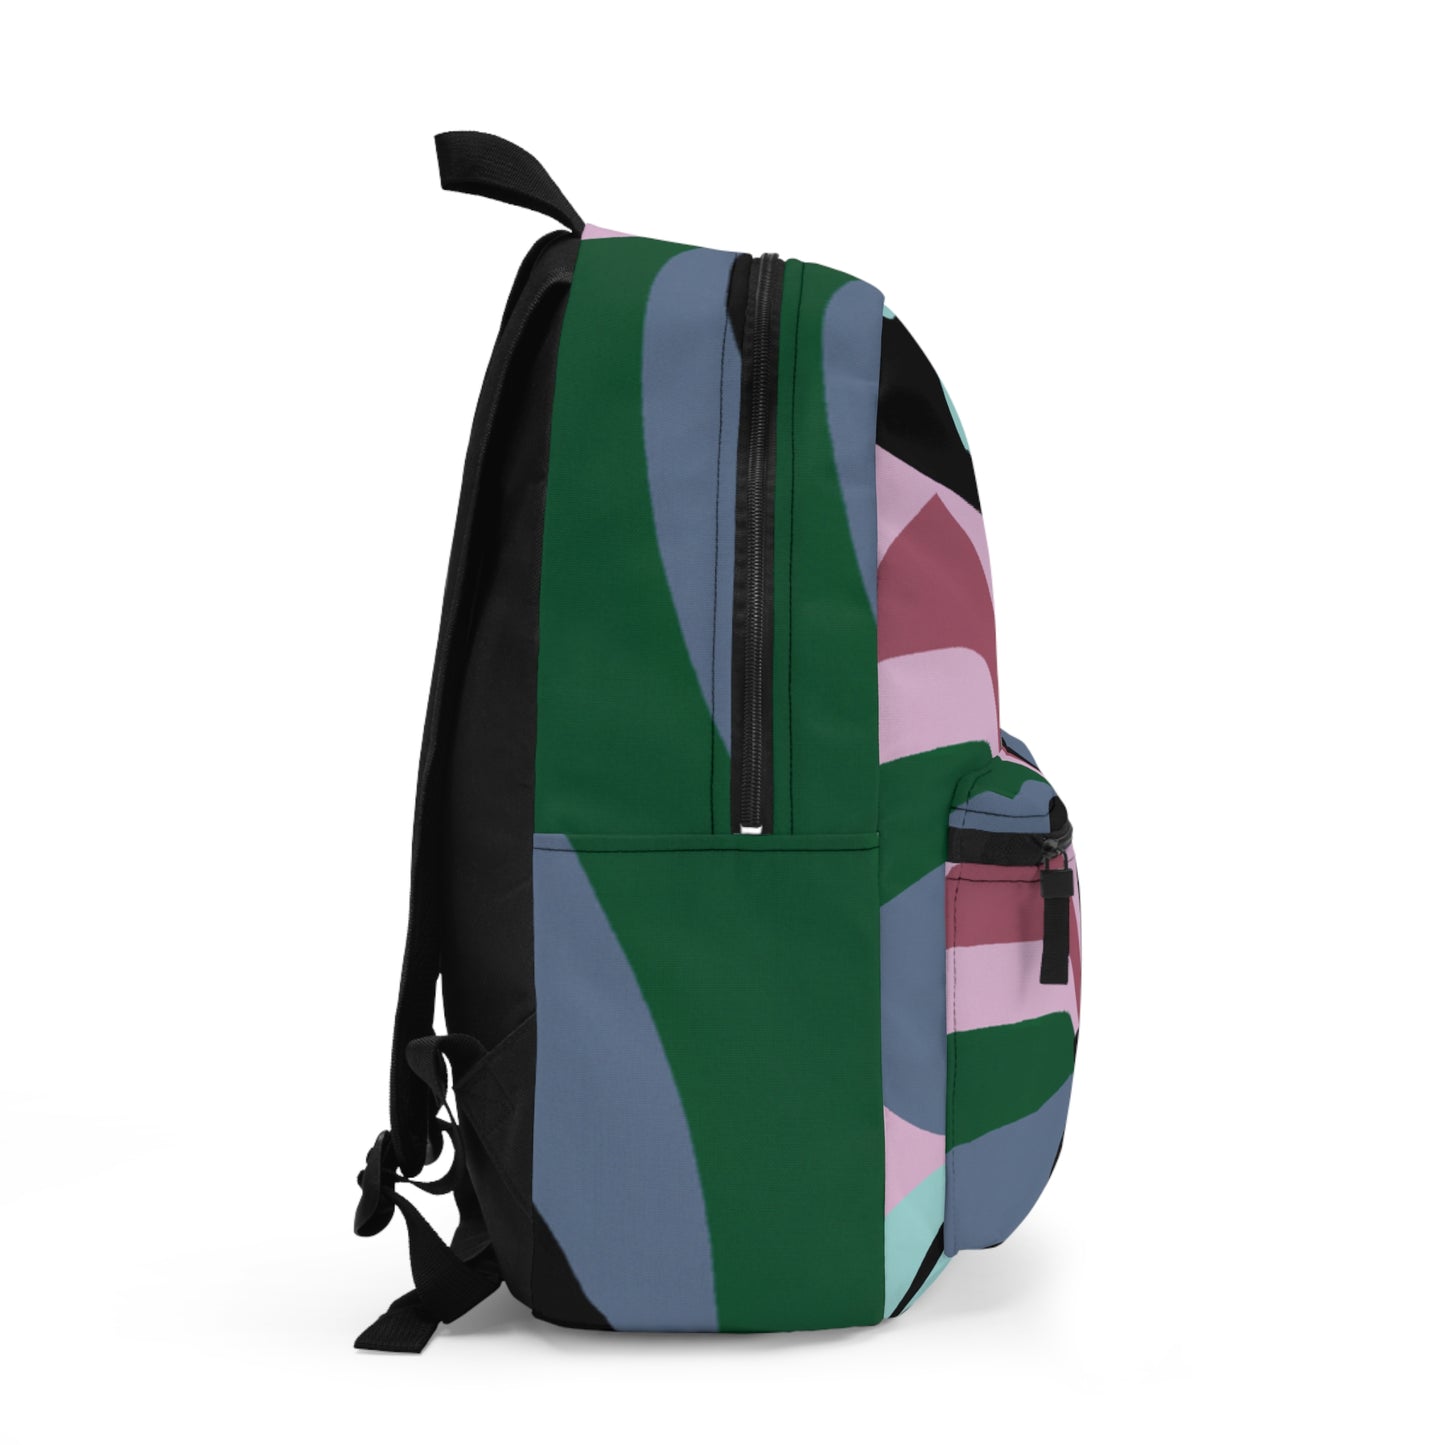 Olivia Figuetto Backpack